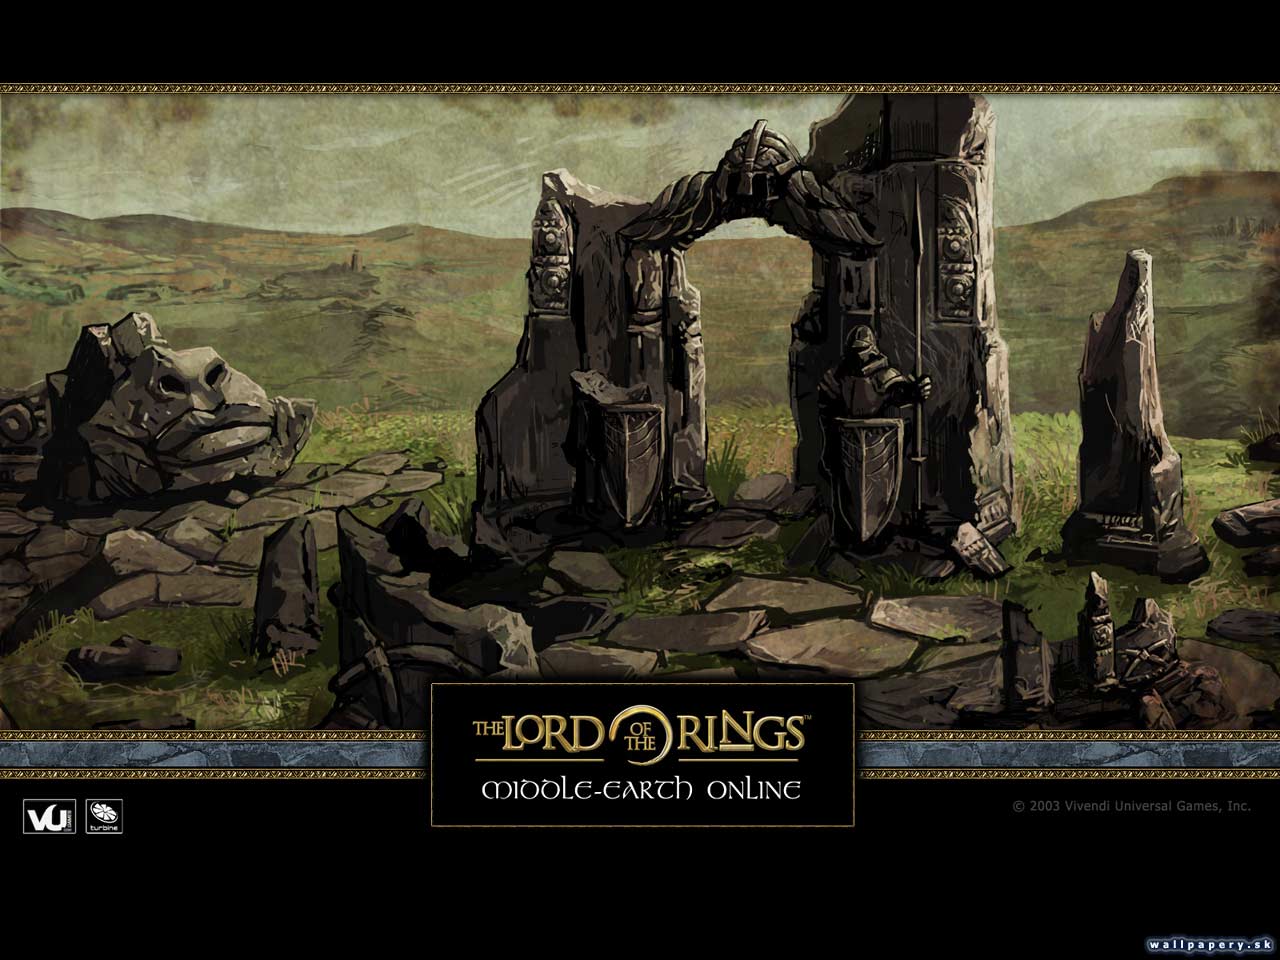 The Lord of the Rings Online: Shadows of Angmar - wallpaper 2